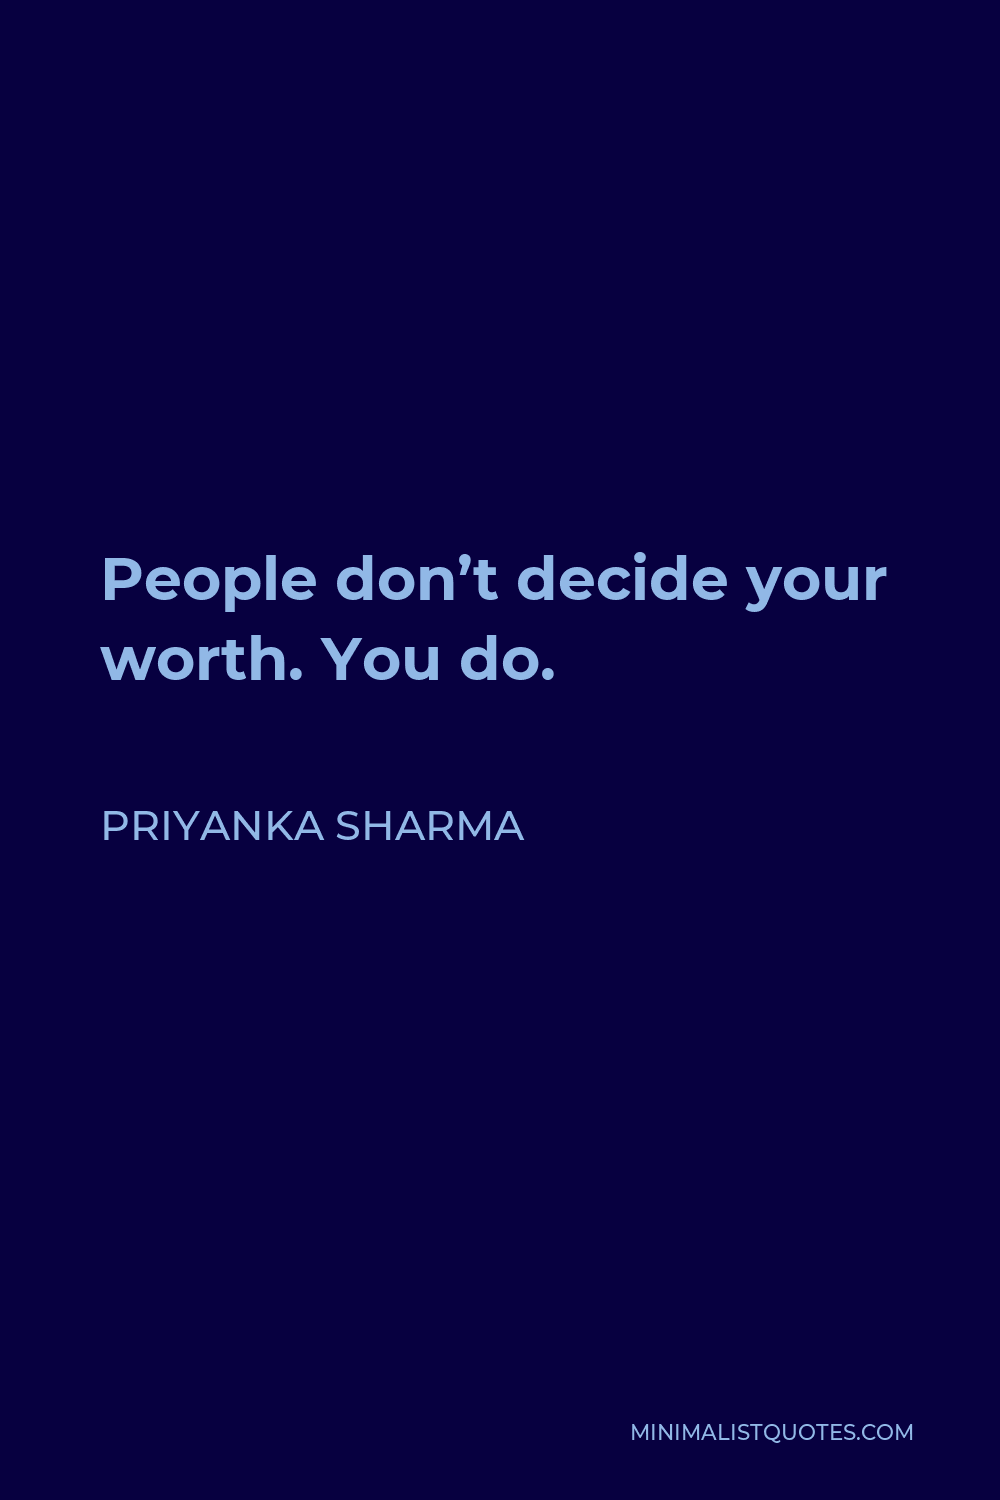 Priyanka Sharma Quote - People don’t decide your worth. You do.